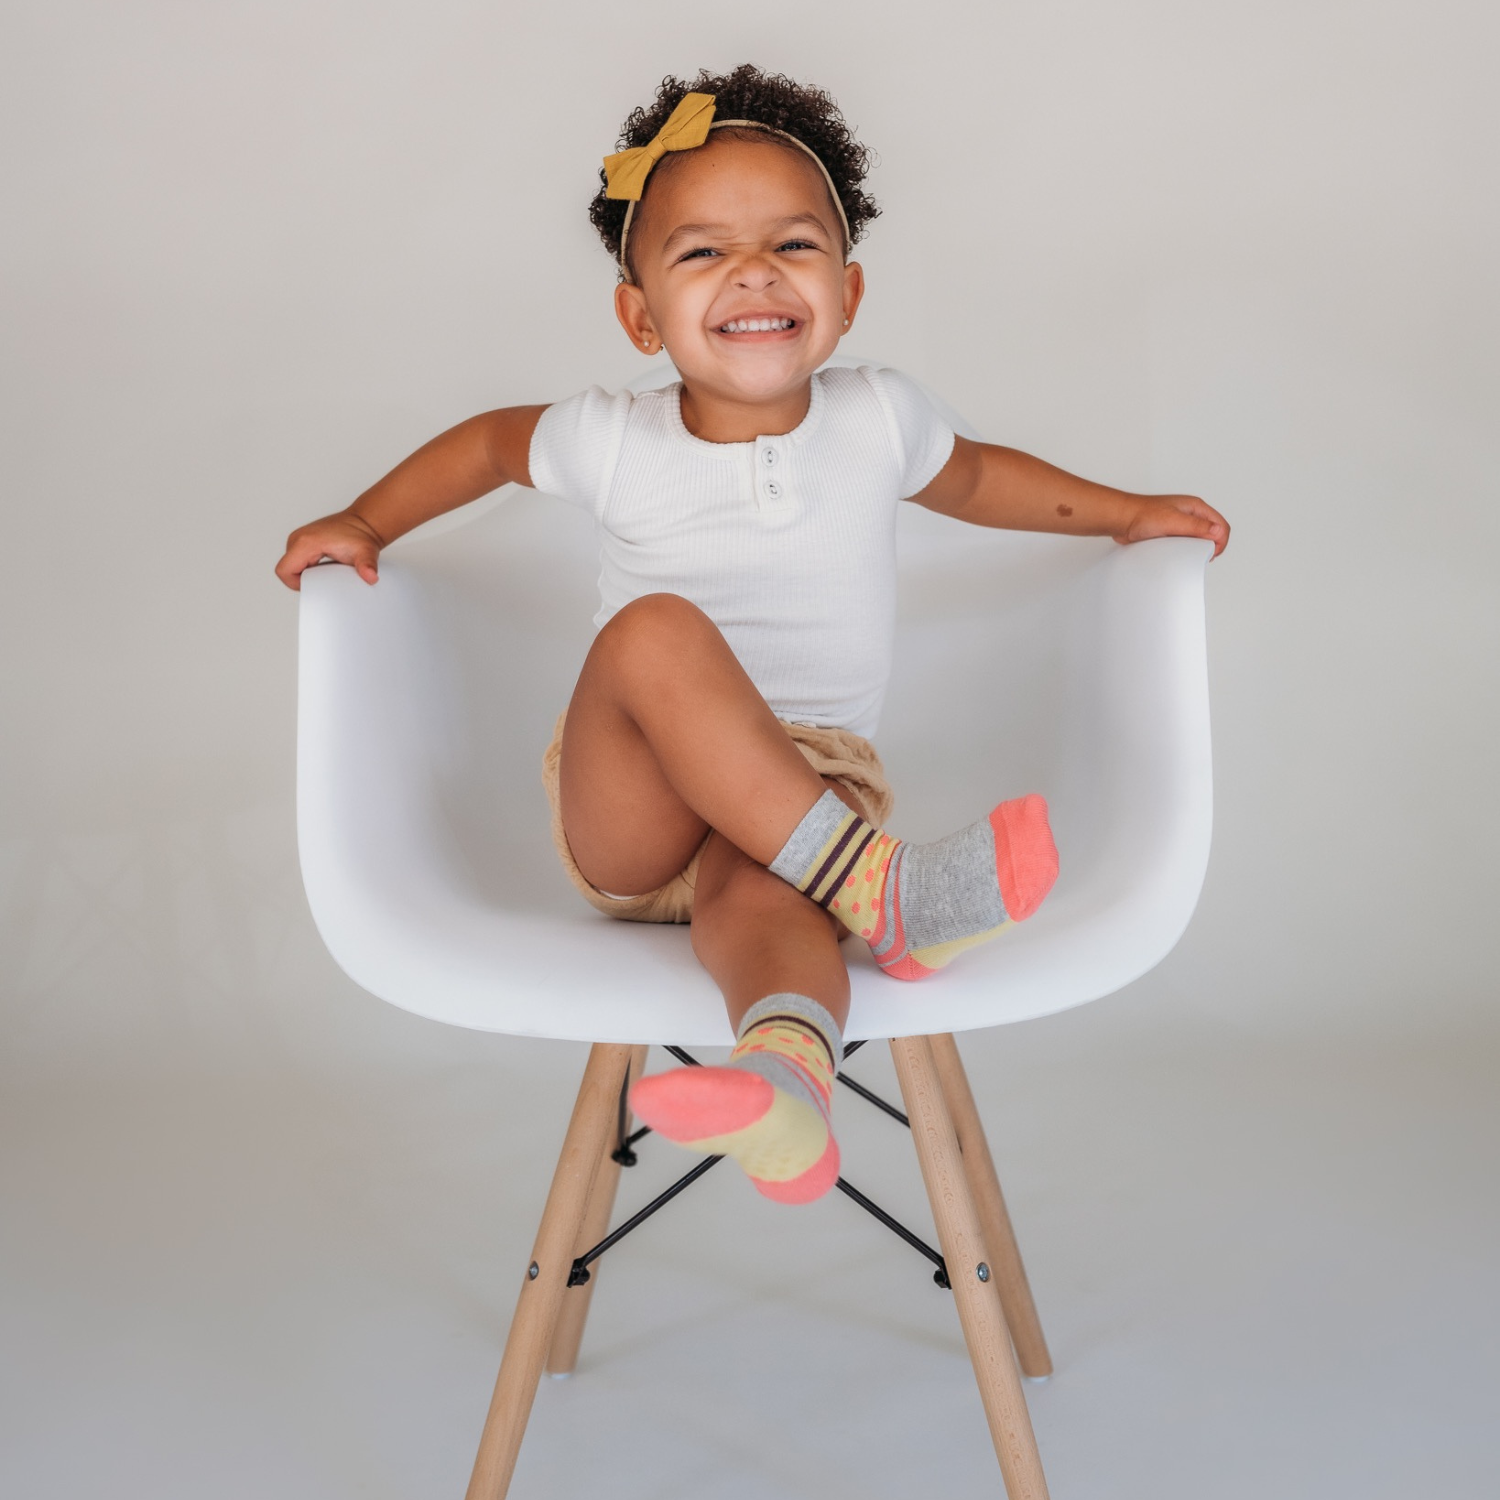 A Little Girl Smiling Wears Organic Cotton Socks 'Types of Stripes'